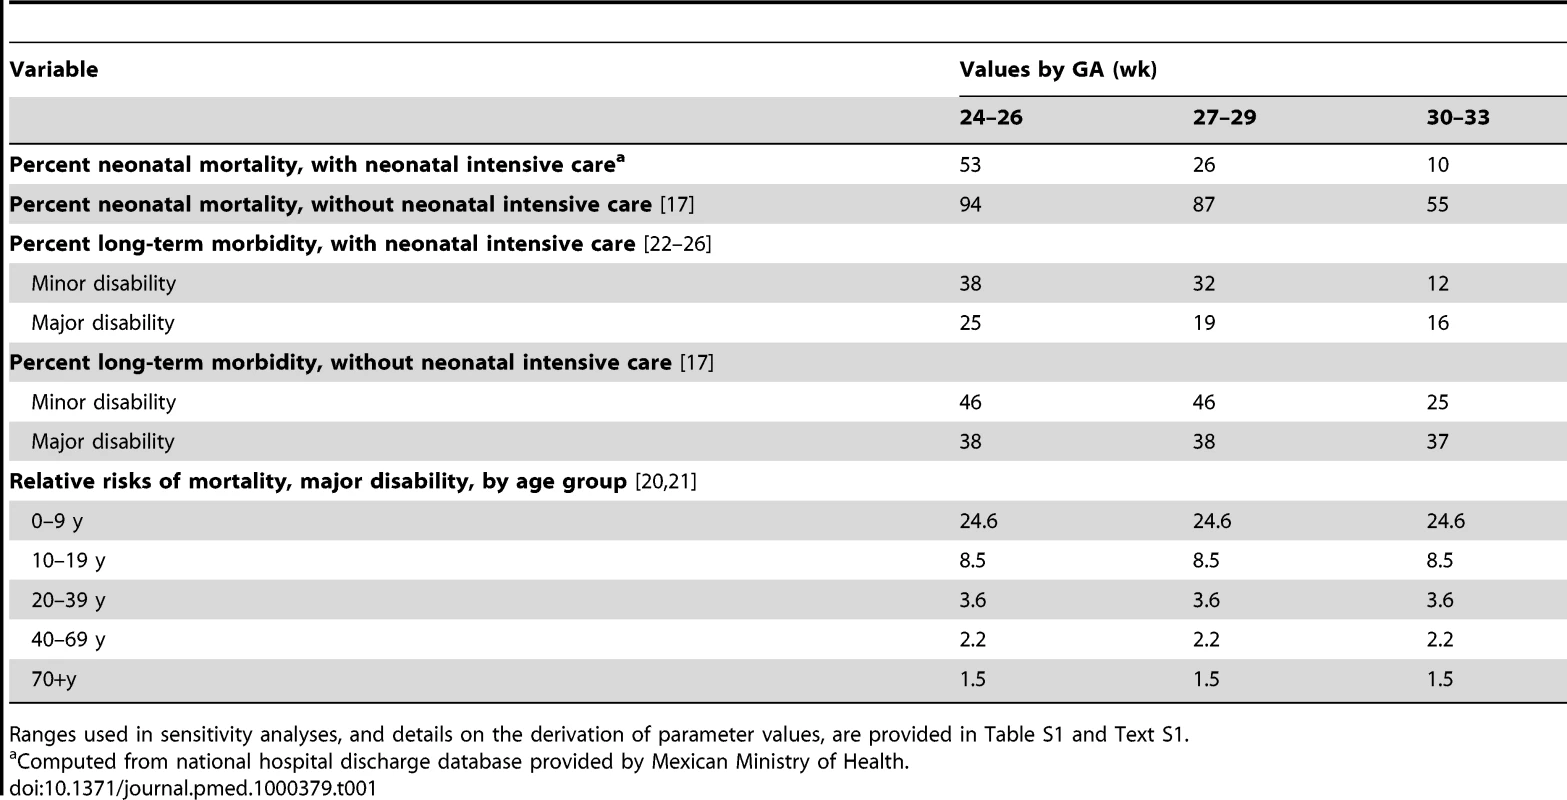 Natural history and clinical variables, base-case values.